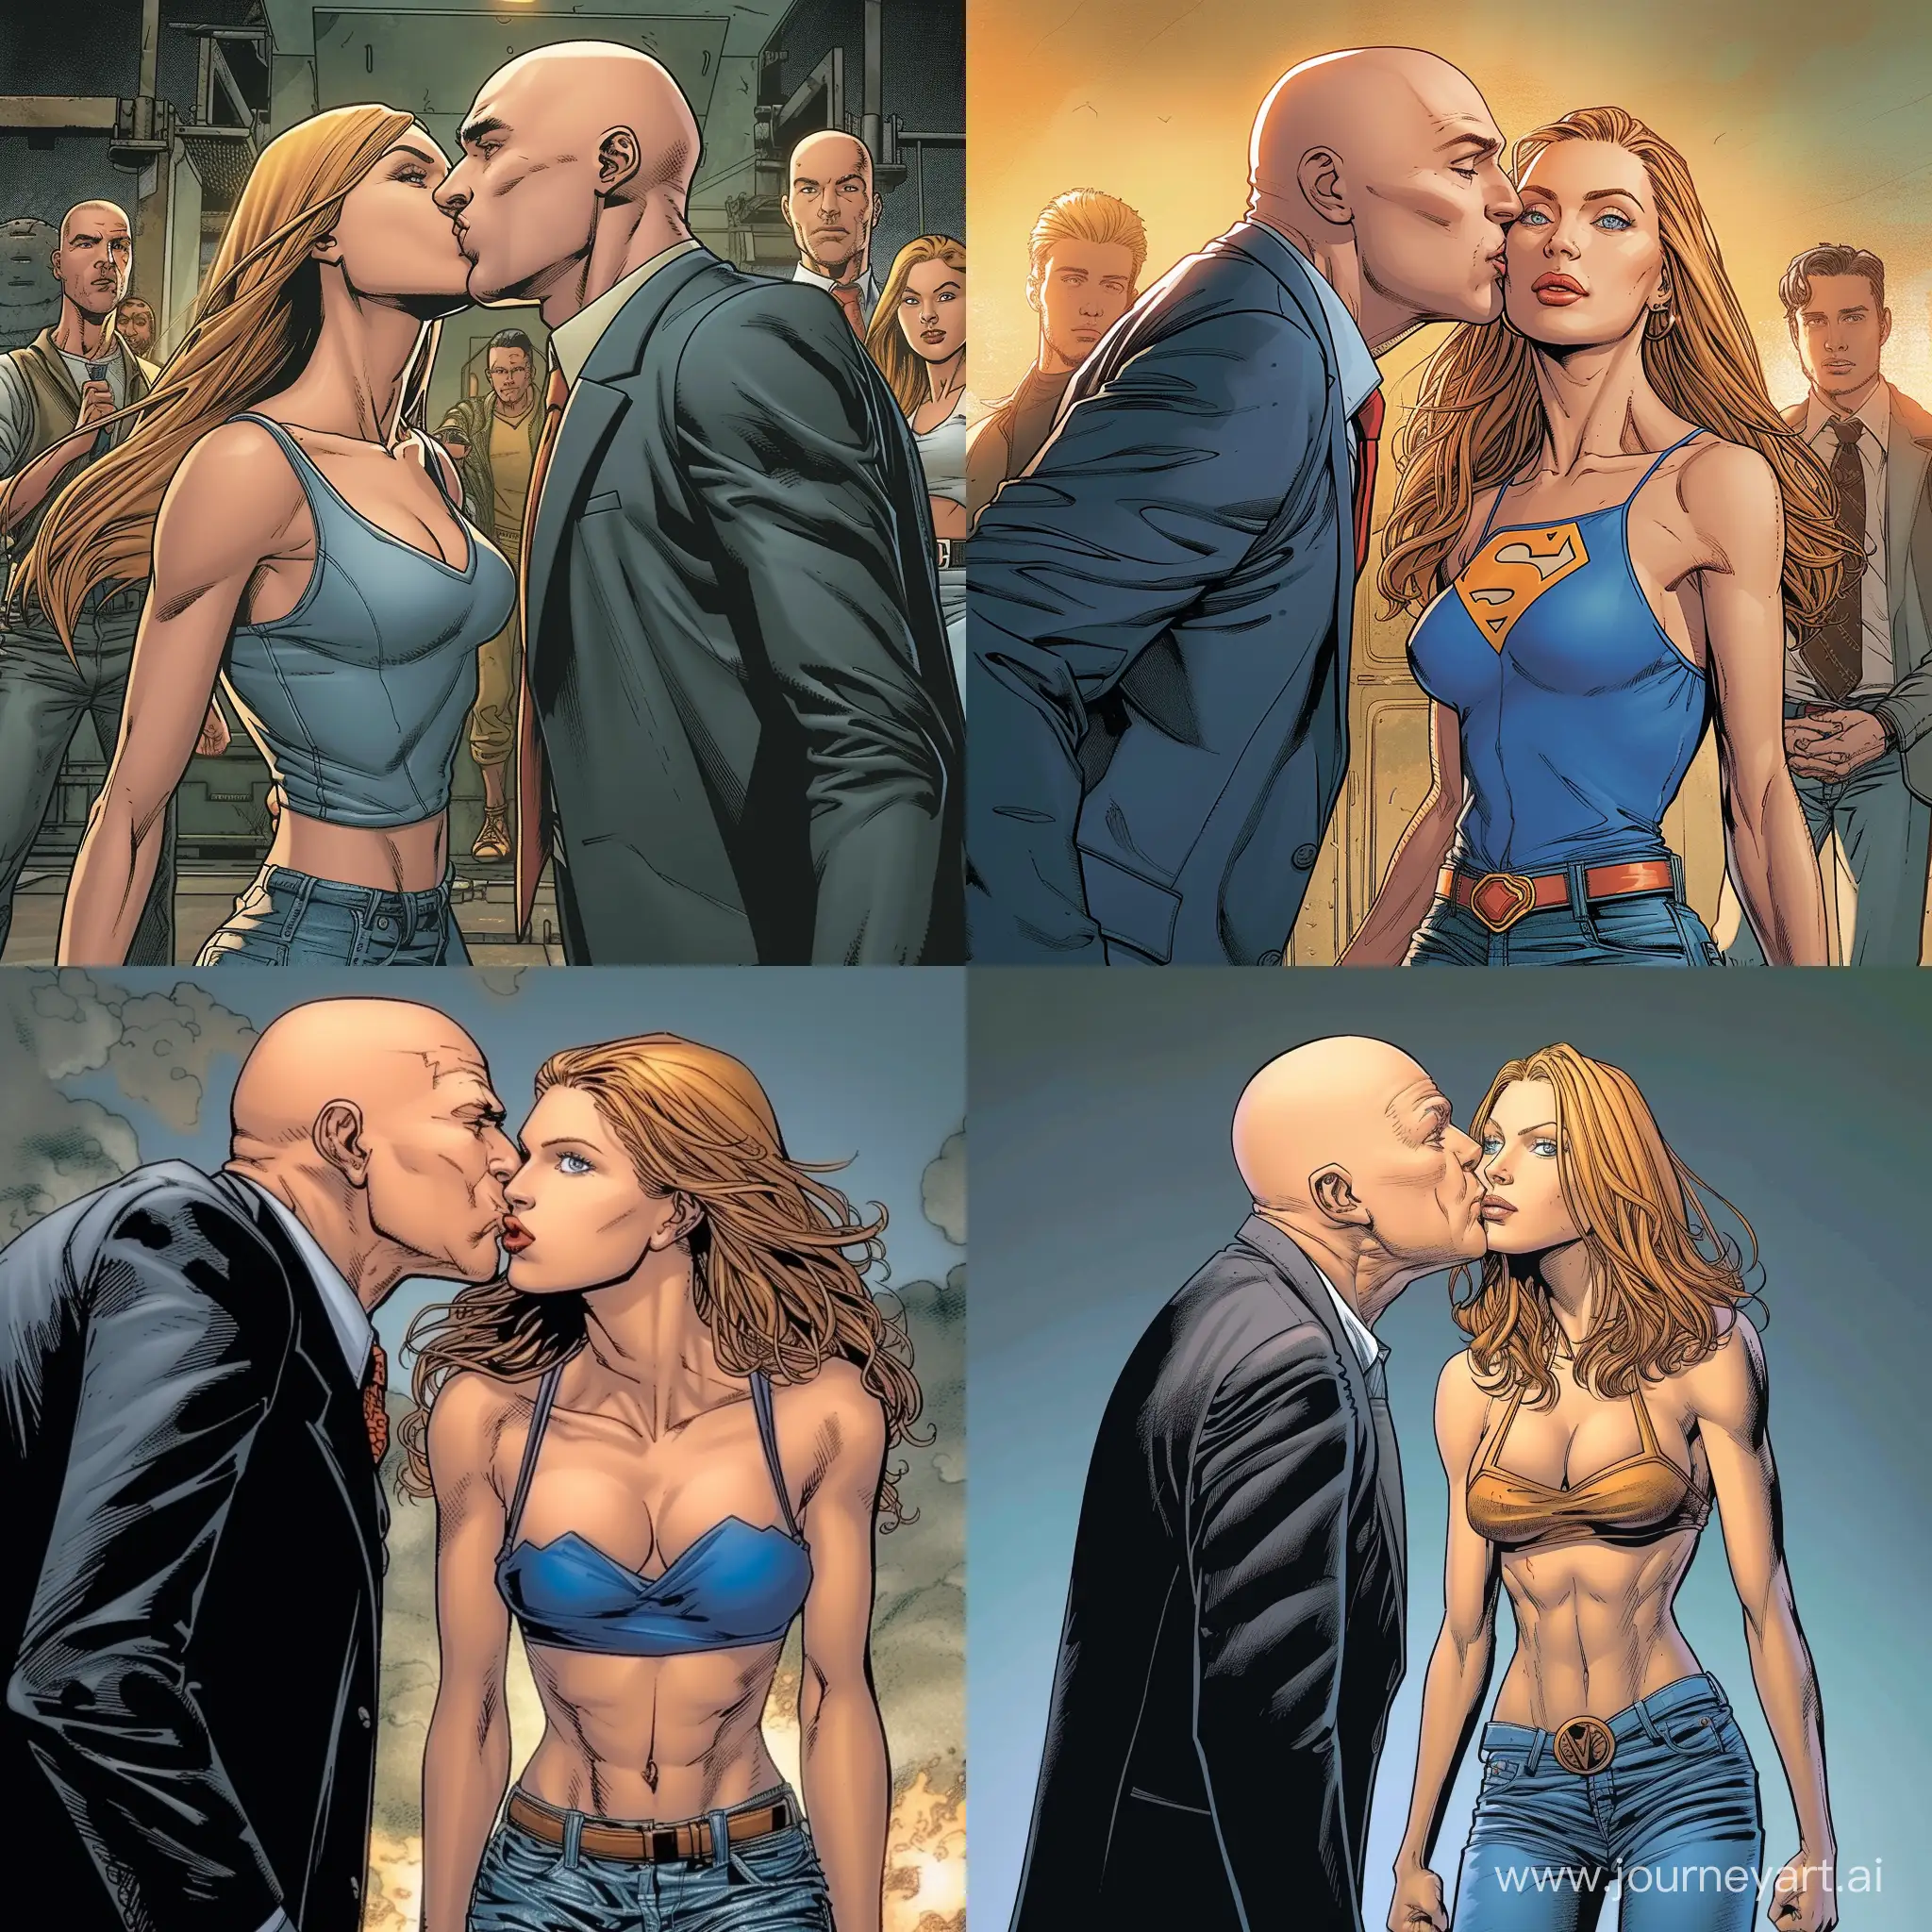 Lex Luthor, in a buisness suit, bald kissing a woman who has a light-medium golden complexion, a squared face shape, full lips, blue eyes, dirty blonde eyebrows arched toward the tail, a button nose, and long, straight strawberry blonde hair with wispy bangs wearing jeans and a tank top
. Meanwhile, Martha Kent Jonathan Kent Clark Kent Lois Lane Chloe Sullivan, and Kara Zor-Elare all watching in horror.